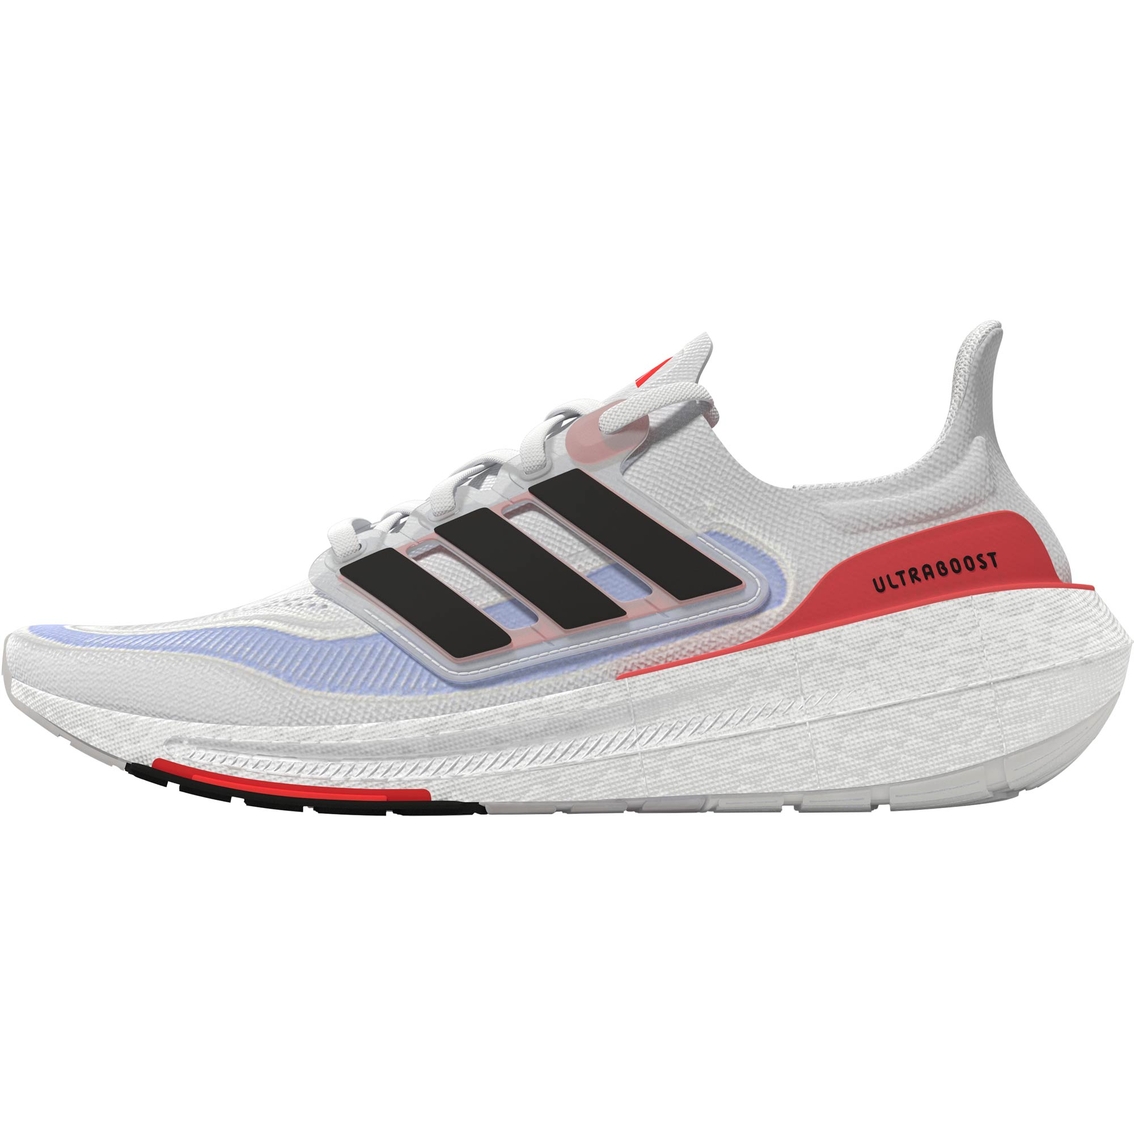 Adidas Men's Ultraboost Running Shoes - Image 2 of 3